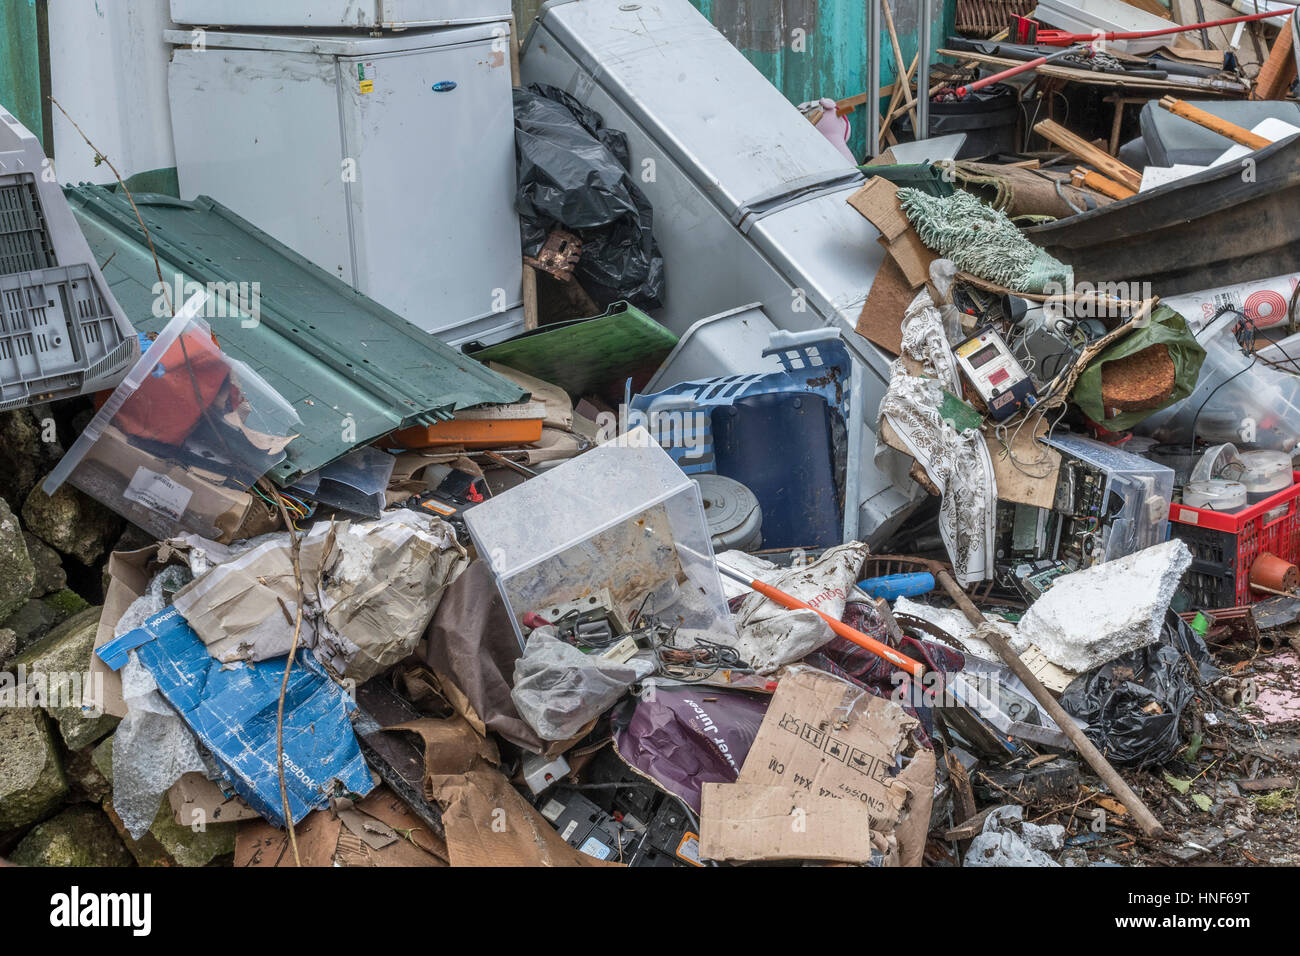 Pile of household rubbish / junk. Decline in public services, and piles of rubbish. Stock Photo